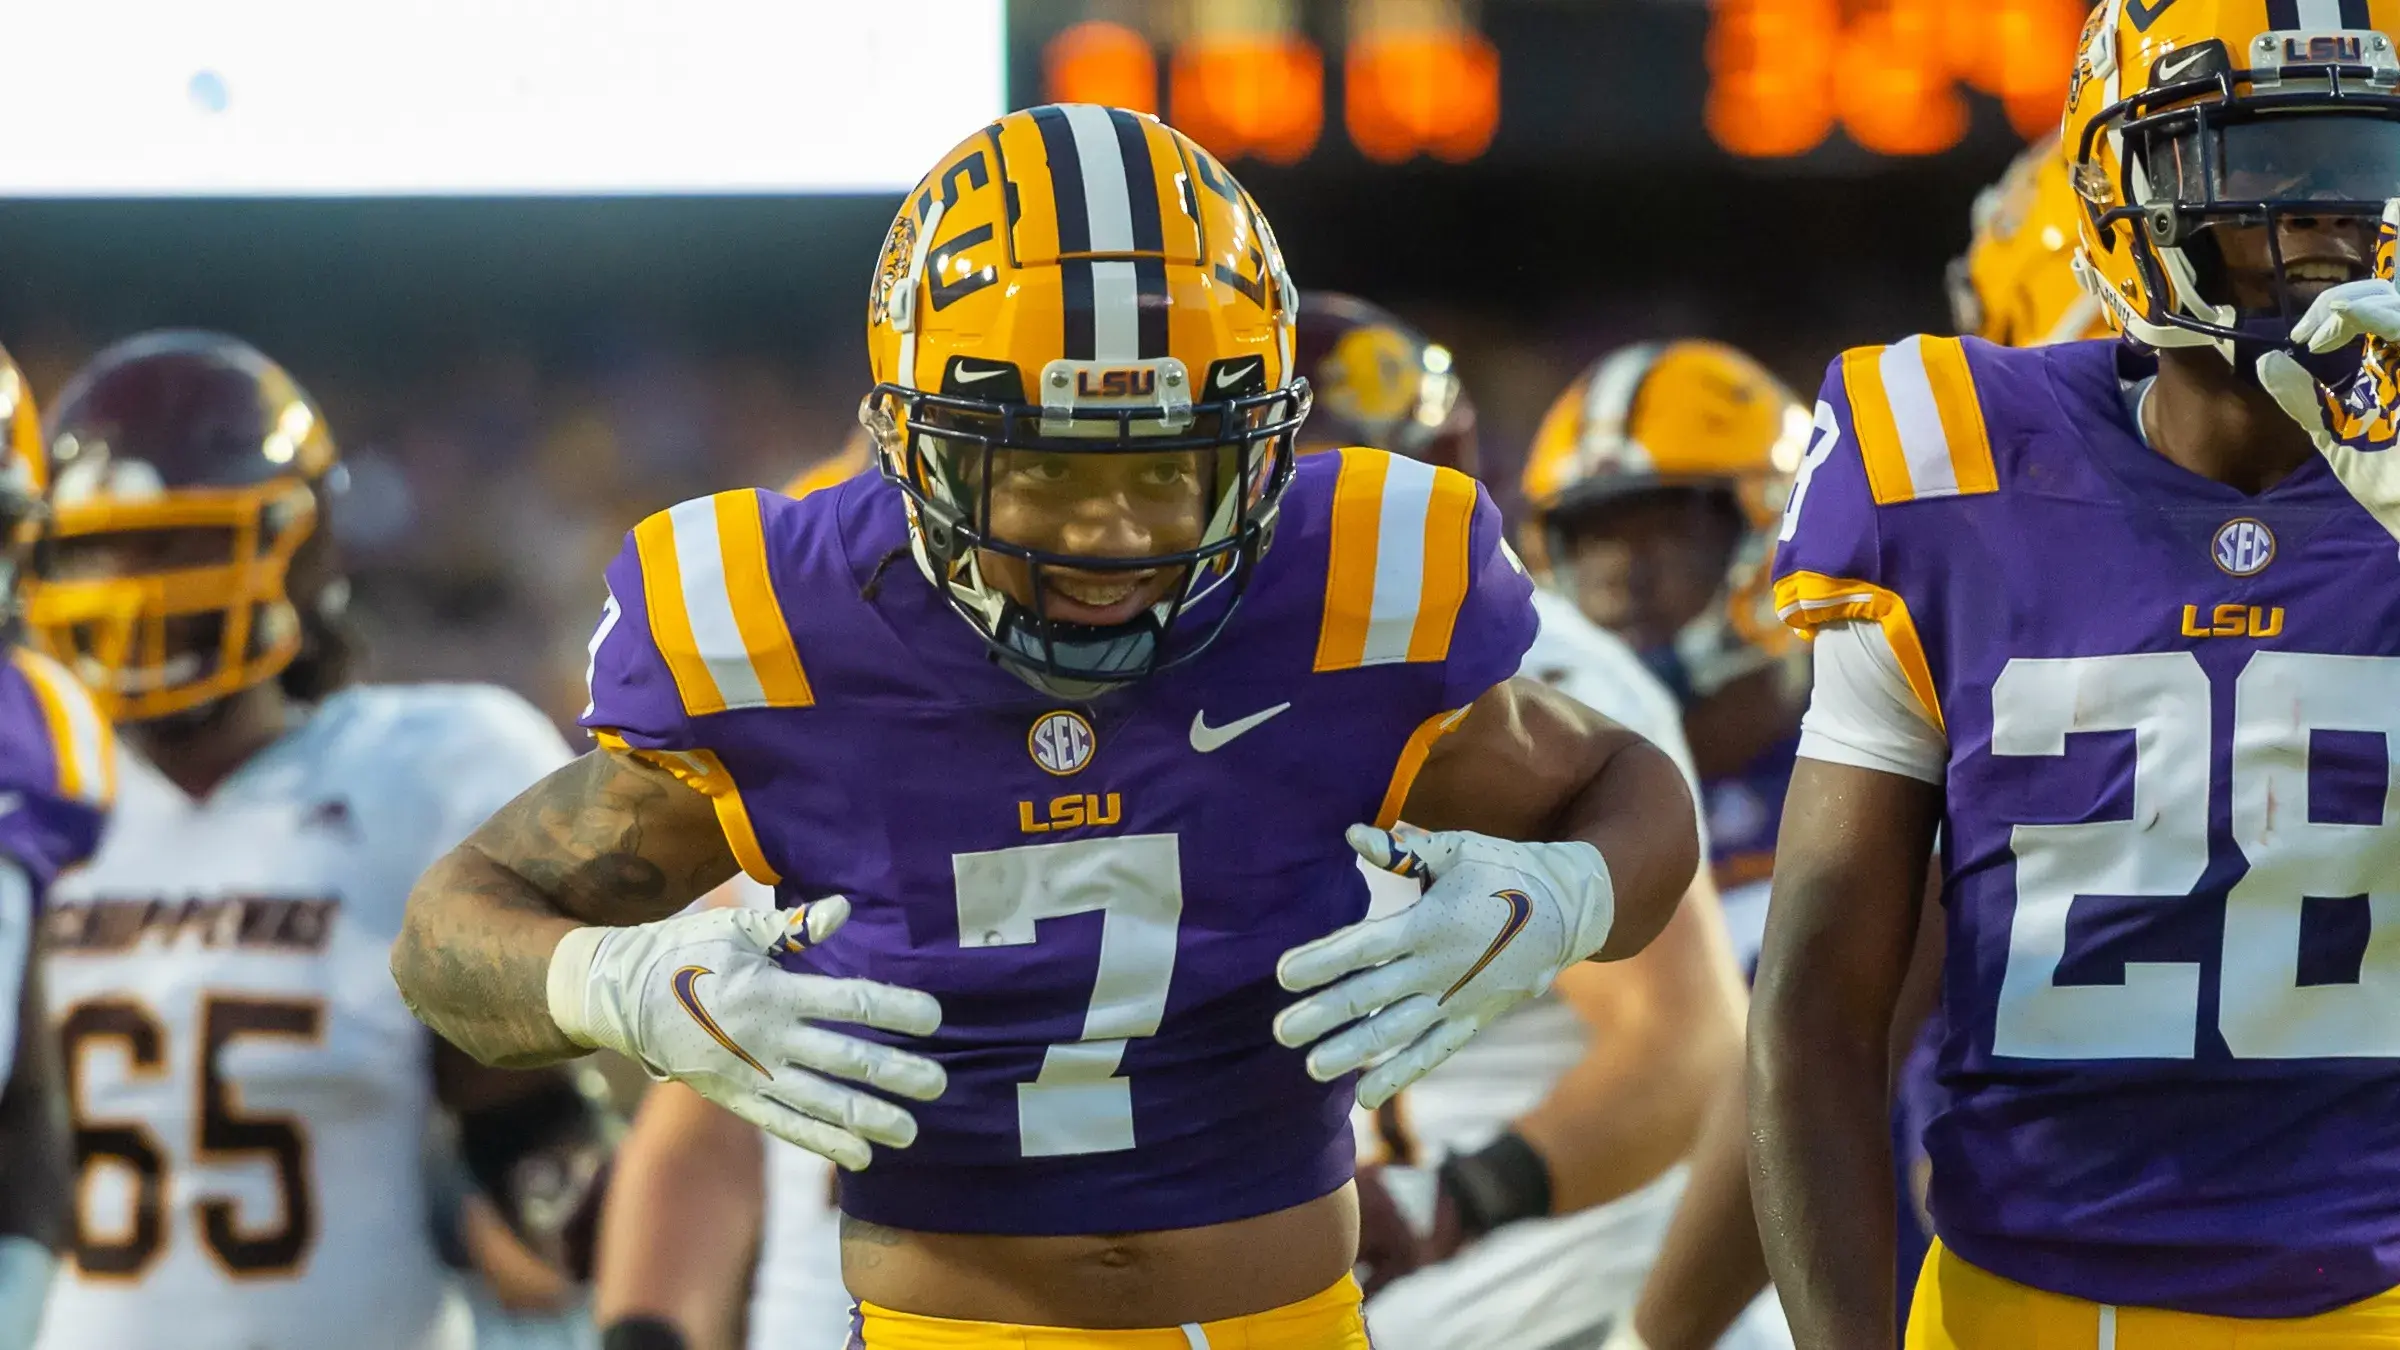 Sep 18, 2021; Baton Rouge, LA, USA; LSU Tigers cornerback Derek Stingley Jr. (7) reacts after making a tackle against the Central Michigan Chippewas at Tiger Stadium. Mandatory Credit: Scott Clause/The Advertiser via USA TODAY NETWORK / © The Advertiser-USA TODAY NETWORK